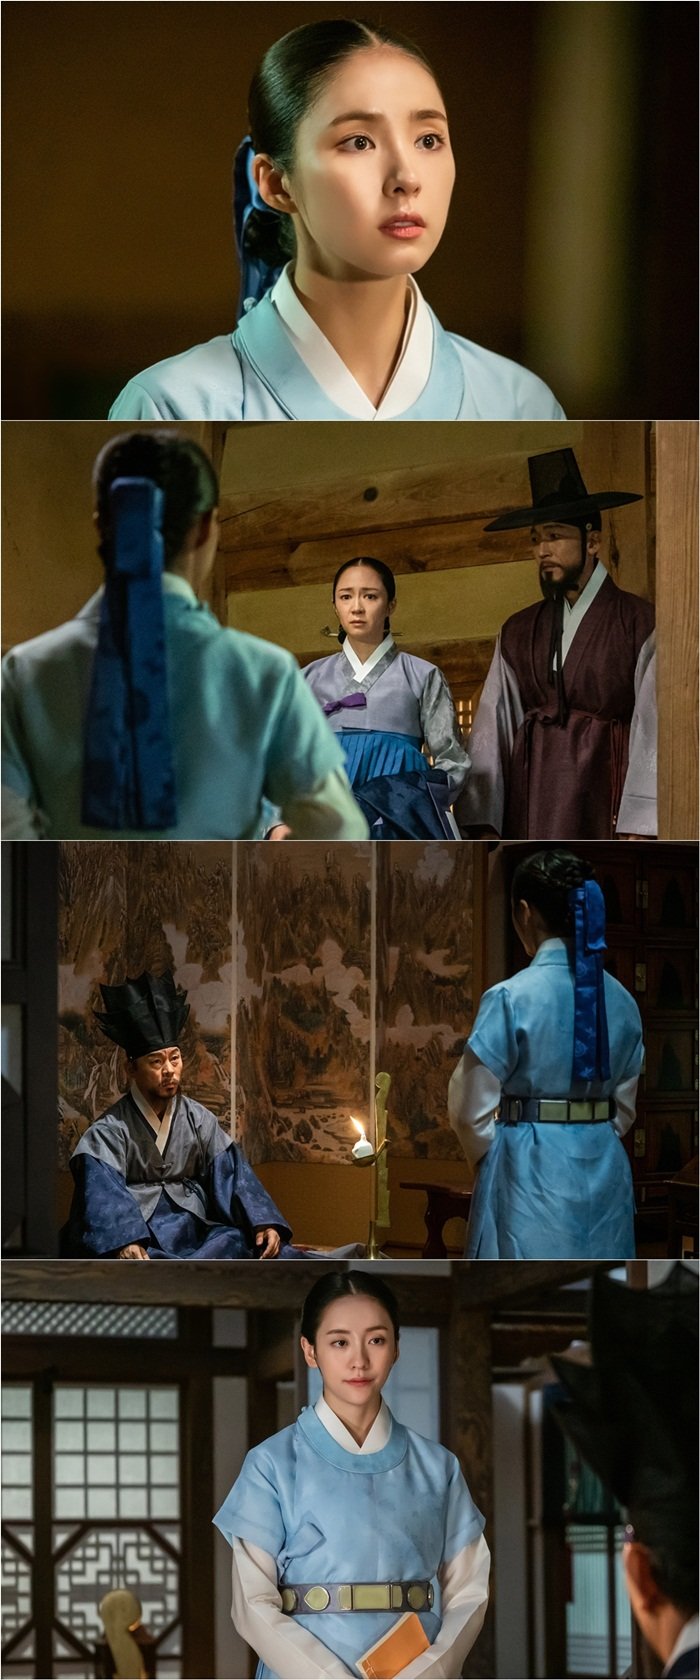 The MBC drama Na Hae-ryung released the scene of Love Triangle (DJ Ivy mix) of Shin Se-kyung (old Na Hae-ryung), his brother Fair exchange (old Jae Kyung) and Jeon Ye-seo (mohwa) on the 27th.Shin Se-kyung, Fair exchange, and Jeon Ye-seo in the public photos attract attention.Jeon Ye-seo is a new and rare woman who maintains close relationship with Lim Ji-jin.Through the death threats from Kim Min-sang (Lee Tae-sang) of Hamyoung-gun, Hyun-wang and Choi Deok-moon (Min Ik-pyeong), the left-wing lawmaker, she made her guess that she was at the center of the case more than 20 years ago.In addition, the Fair exchange and Jeon Ye-seo grew up together in Seoraewon as a child, and it is implied that they have been separated from each other through unspeakable events.Then, I met Jeon Ye-seo, who is spreading the law of uduoma in Pyeongan-do, and showed her how to rely on her with comfort.As the interest in the meeting of Shin Se-kyung, Fair exchange, and Jeon Ye-seo is amplified, the jeon Ye-seo, who premiered in any situation, is causing a pupil earthquake by seeing Shin Se-kyungThe puzzled Shin Se-kyung and the embarrassed Fair Exchange look raise curiosity about what kind of relationship they are involved in.In the meantime, Choi Deok-moon, who is constantly following Jeon Ye-seo, is sensing a suspicious movement, raising tension.Choi Deok-moon, who looks sharply at Park Ji-hyun (Song Sa-hee), who came to him to be his weapon, and Park Ji-hyun, who is holding a remorse without being intimidated by this, raises questions about what conversation will come between them.The new employee, Na Hae-ryung, said Choi Deok-moon, who chases Jeon Ye-seo and Seoraewon in earnest.Fair exchange and Jeon Ye-seo have a common denominator called Seoraewon, and please check what is going through them and Shin Se-kyung Tomorrow (28th) will air 25 and 26 episodes at 8:55 p.m.